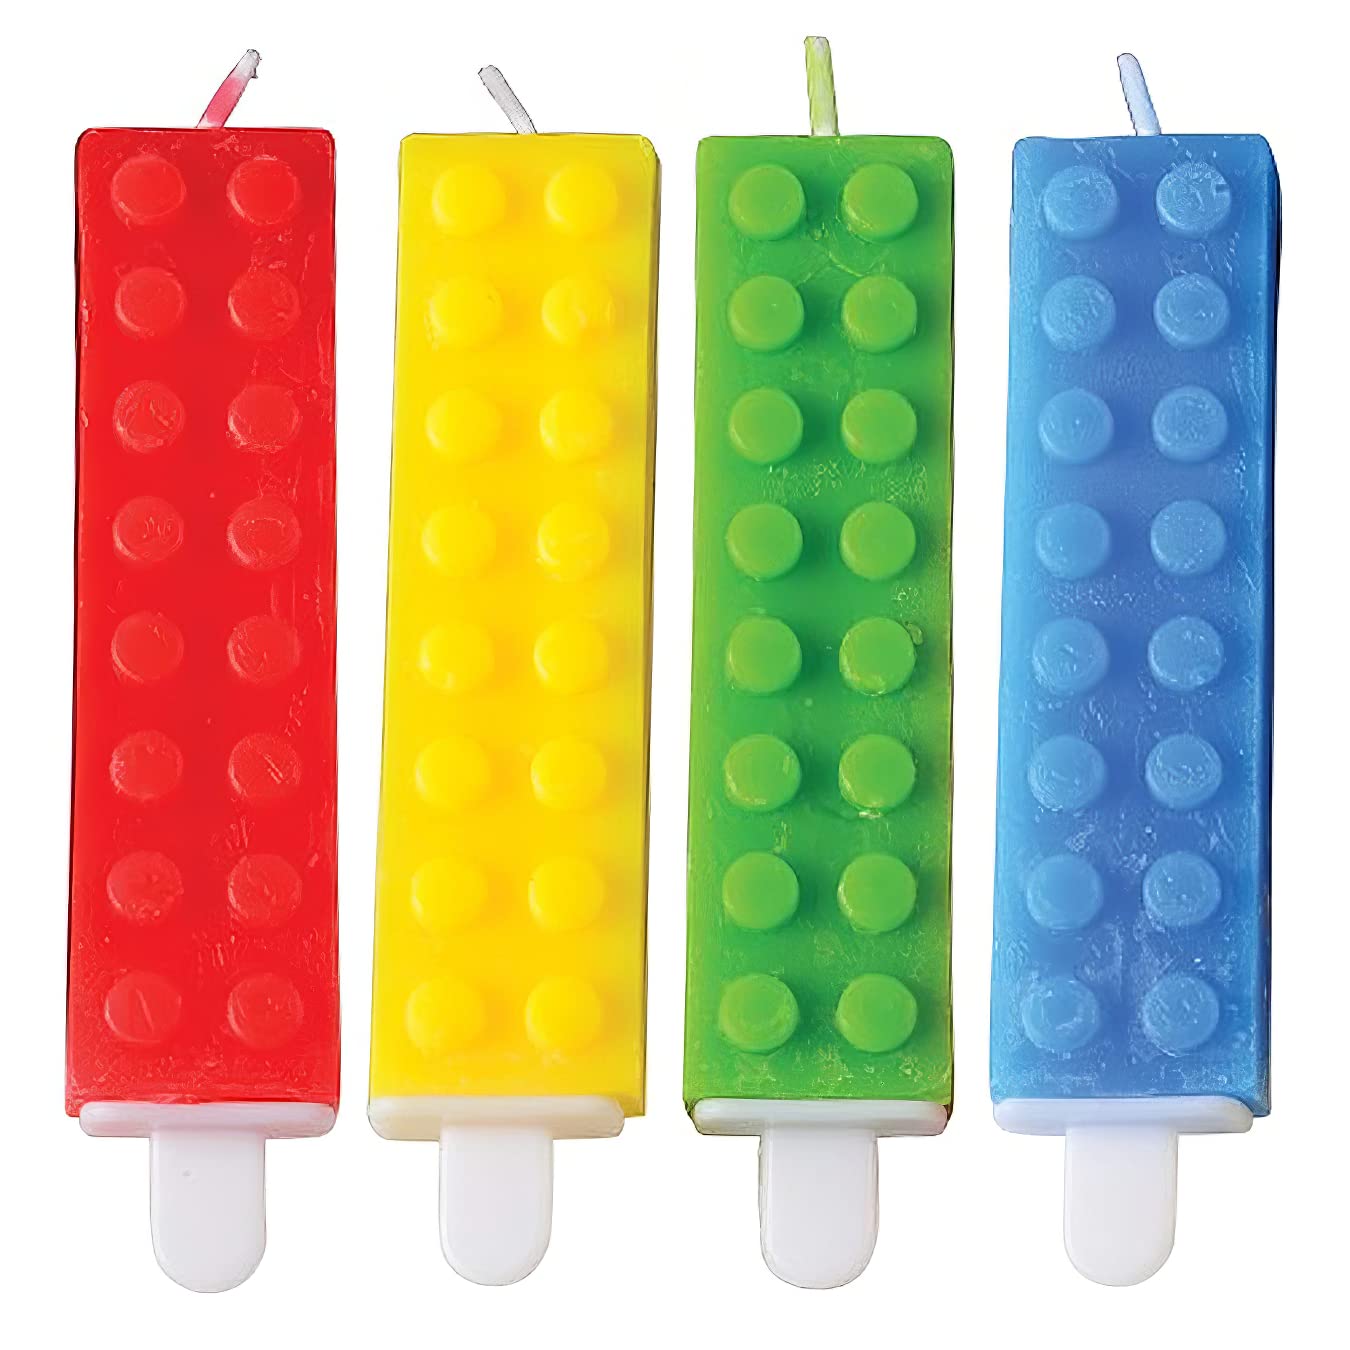 Brick Candles, Building Block Themed Birthday Cake Candles - Pack of 4